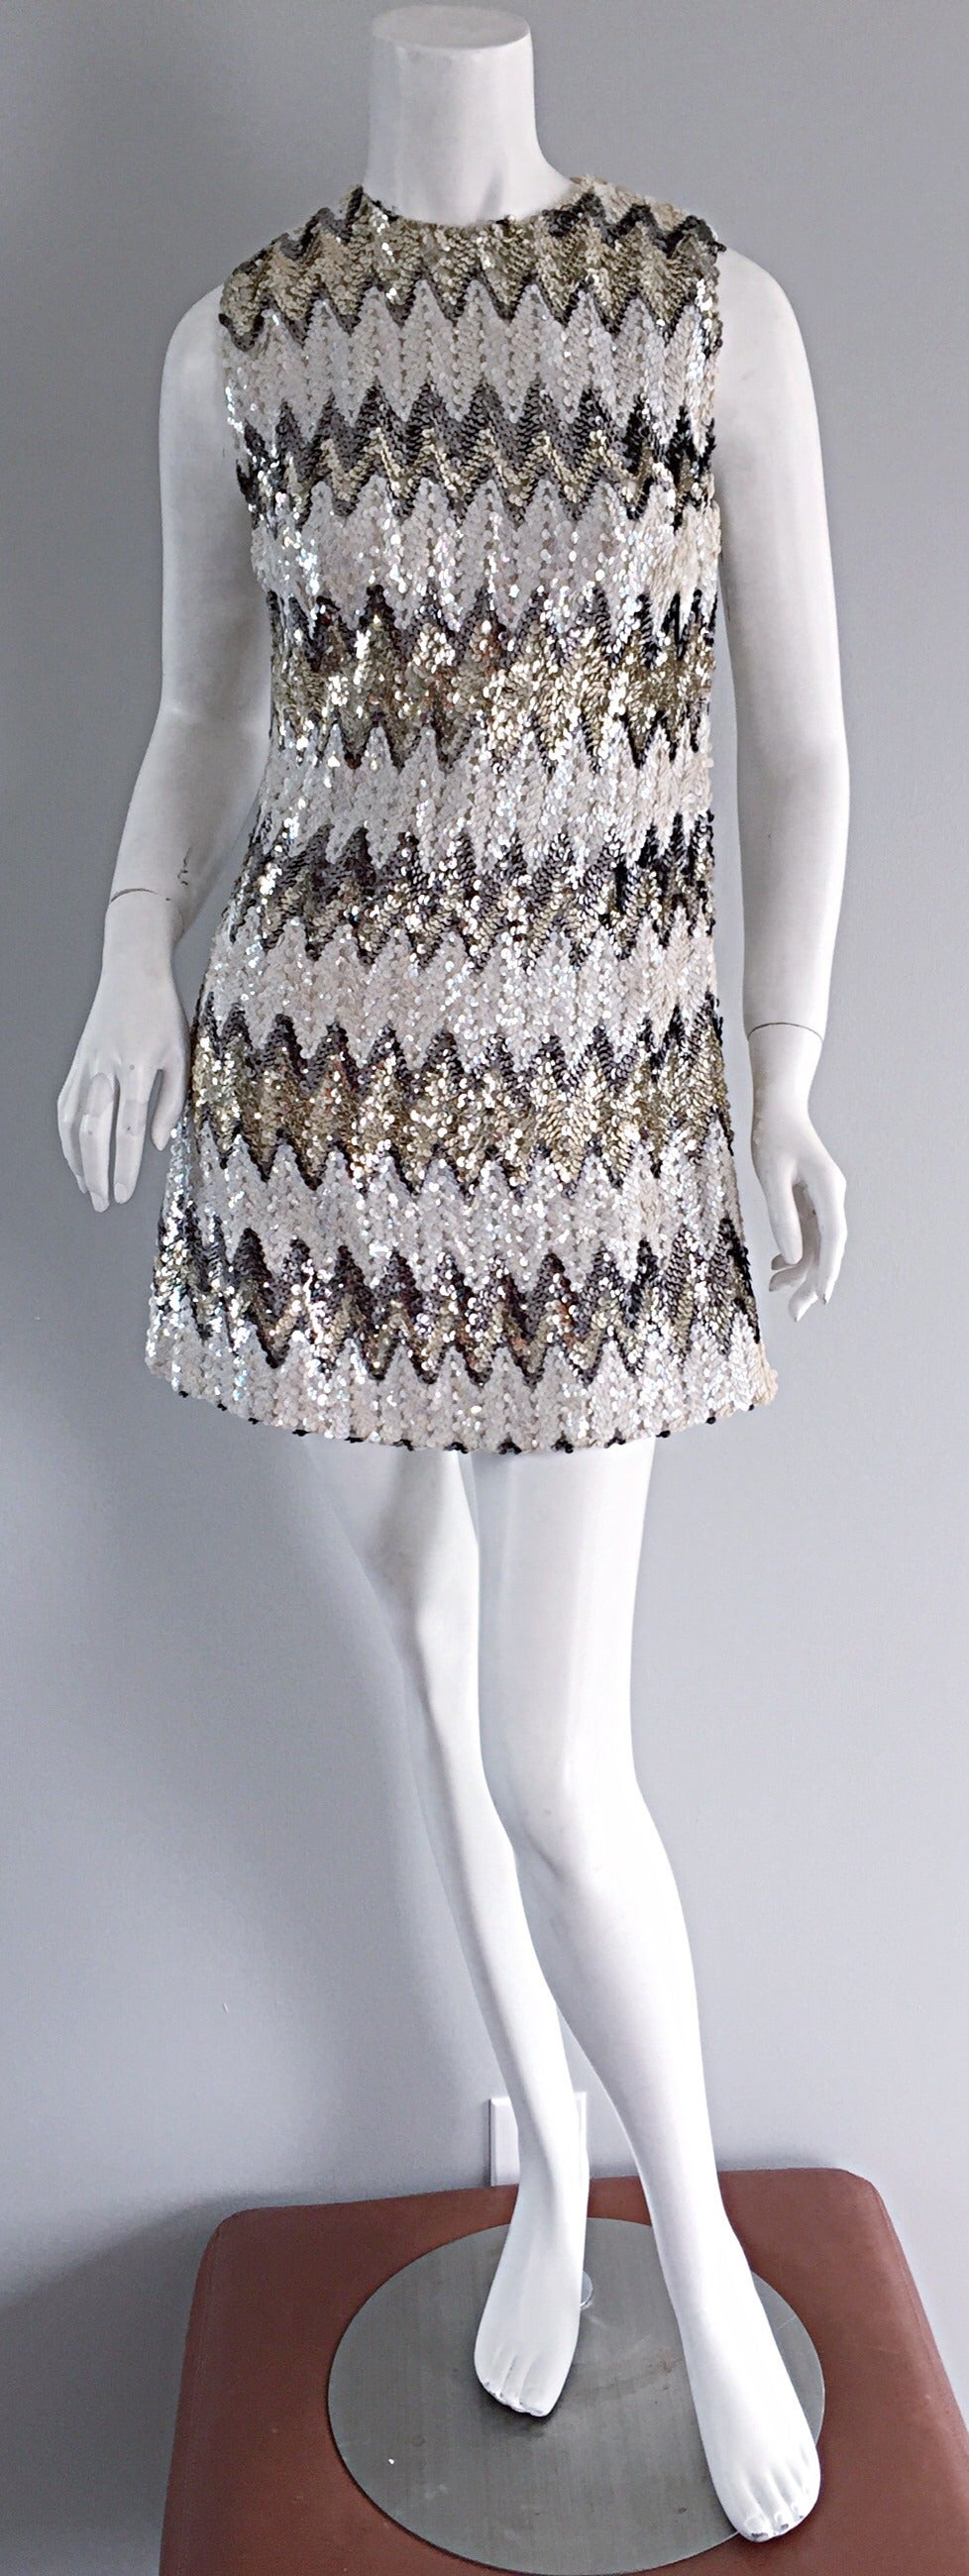 Beautiful vintage 1960s A-Line sequin mini dress! Features zig zags of sequins in silver, white and gold!! Flattering A-Line fit that looks great paired with sandals, wedges or strappy heels. Metal zipper up the back. Fully lined. In great